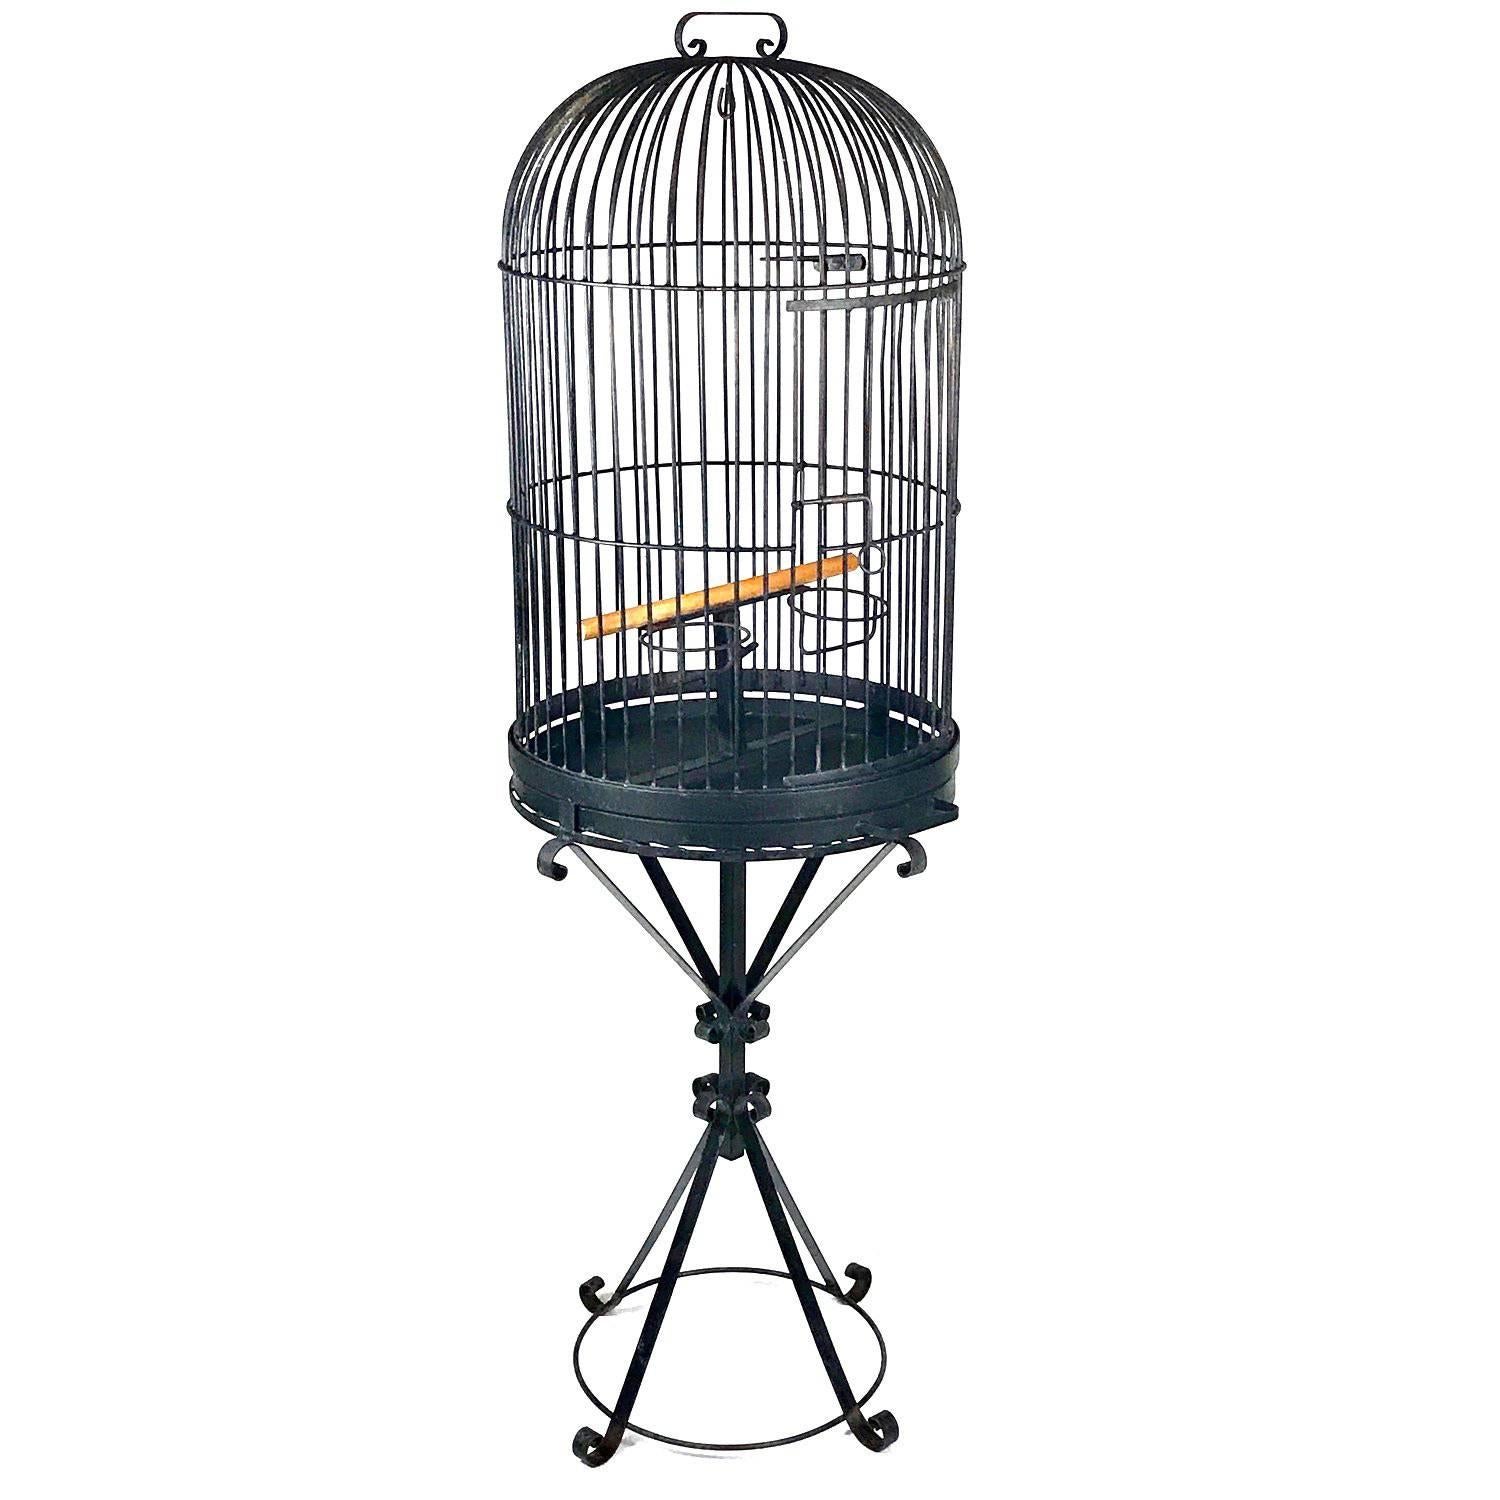 Monumental Wrought Iron Parrot Birdcage on Pedestal, Early 20th Century